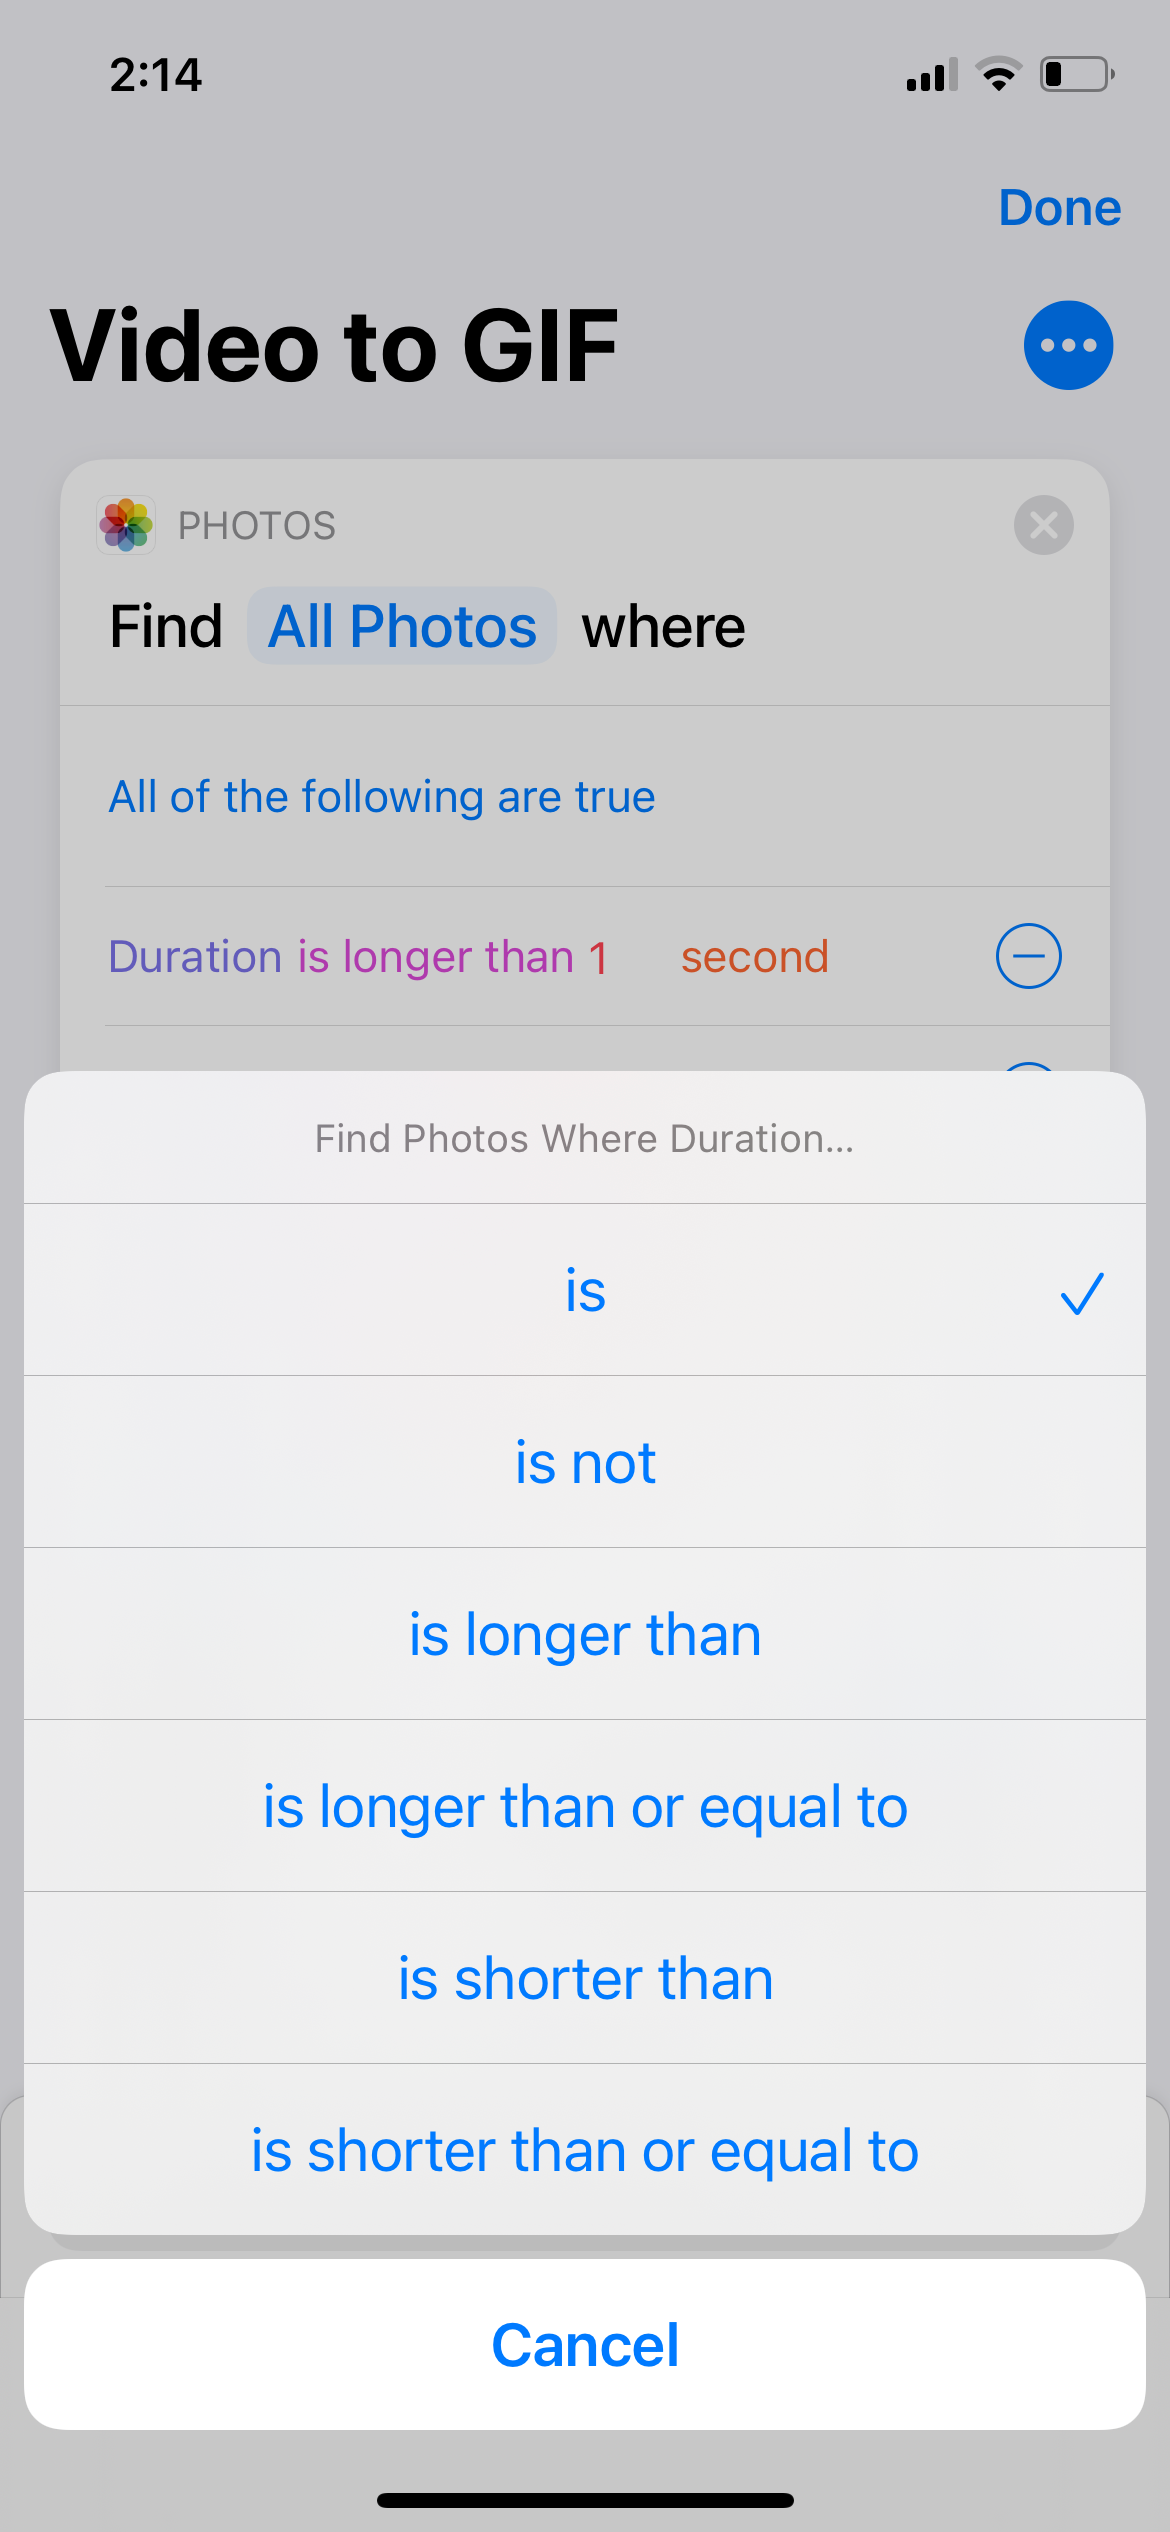 Choosing is on iPhone Shortcuts for video GIF duration